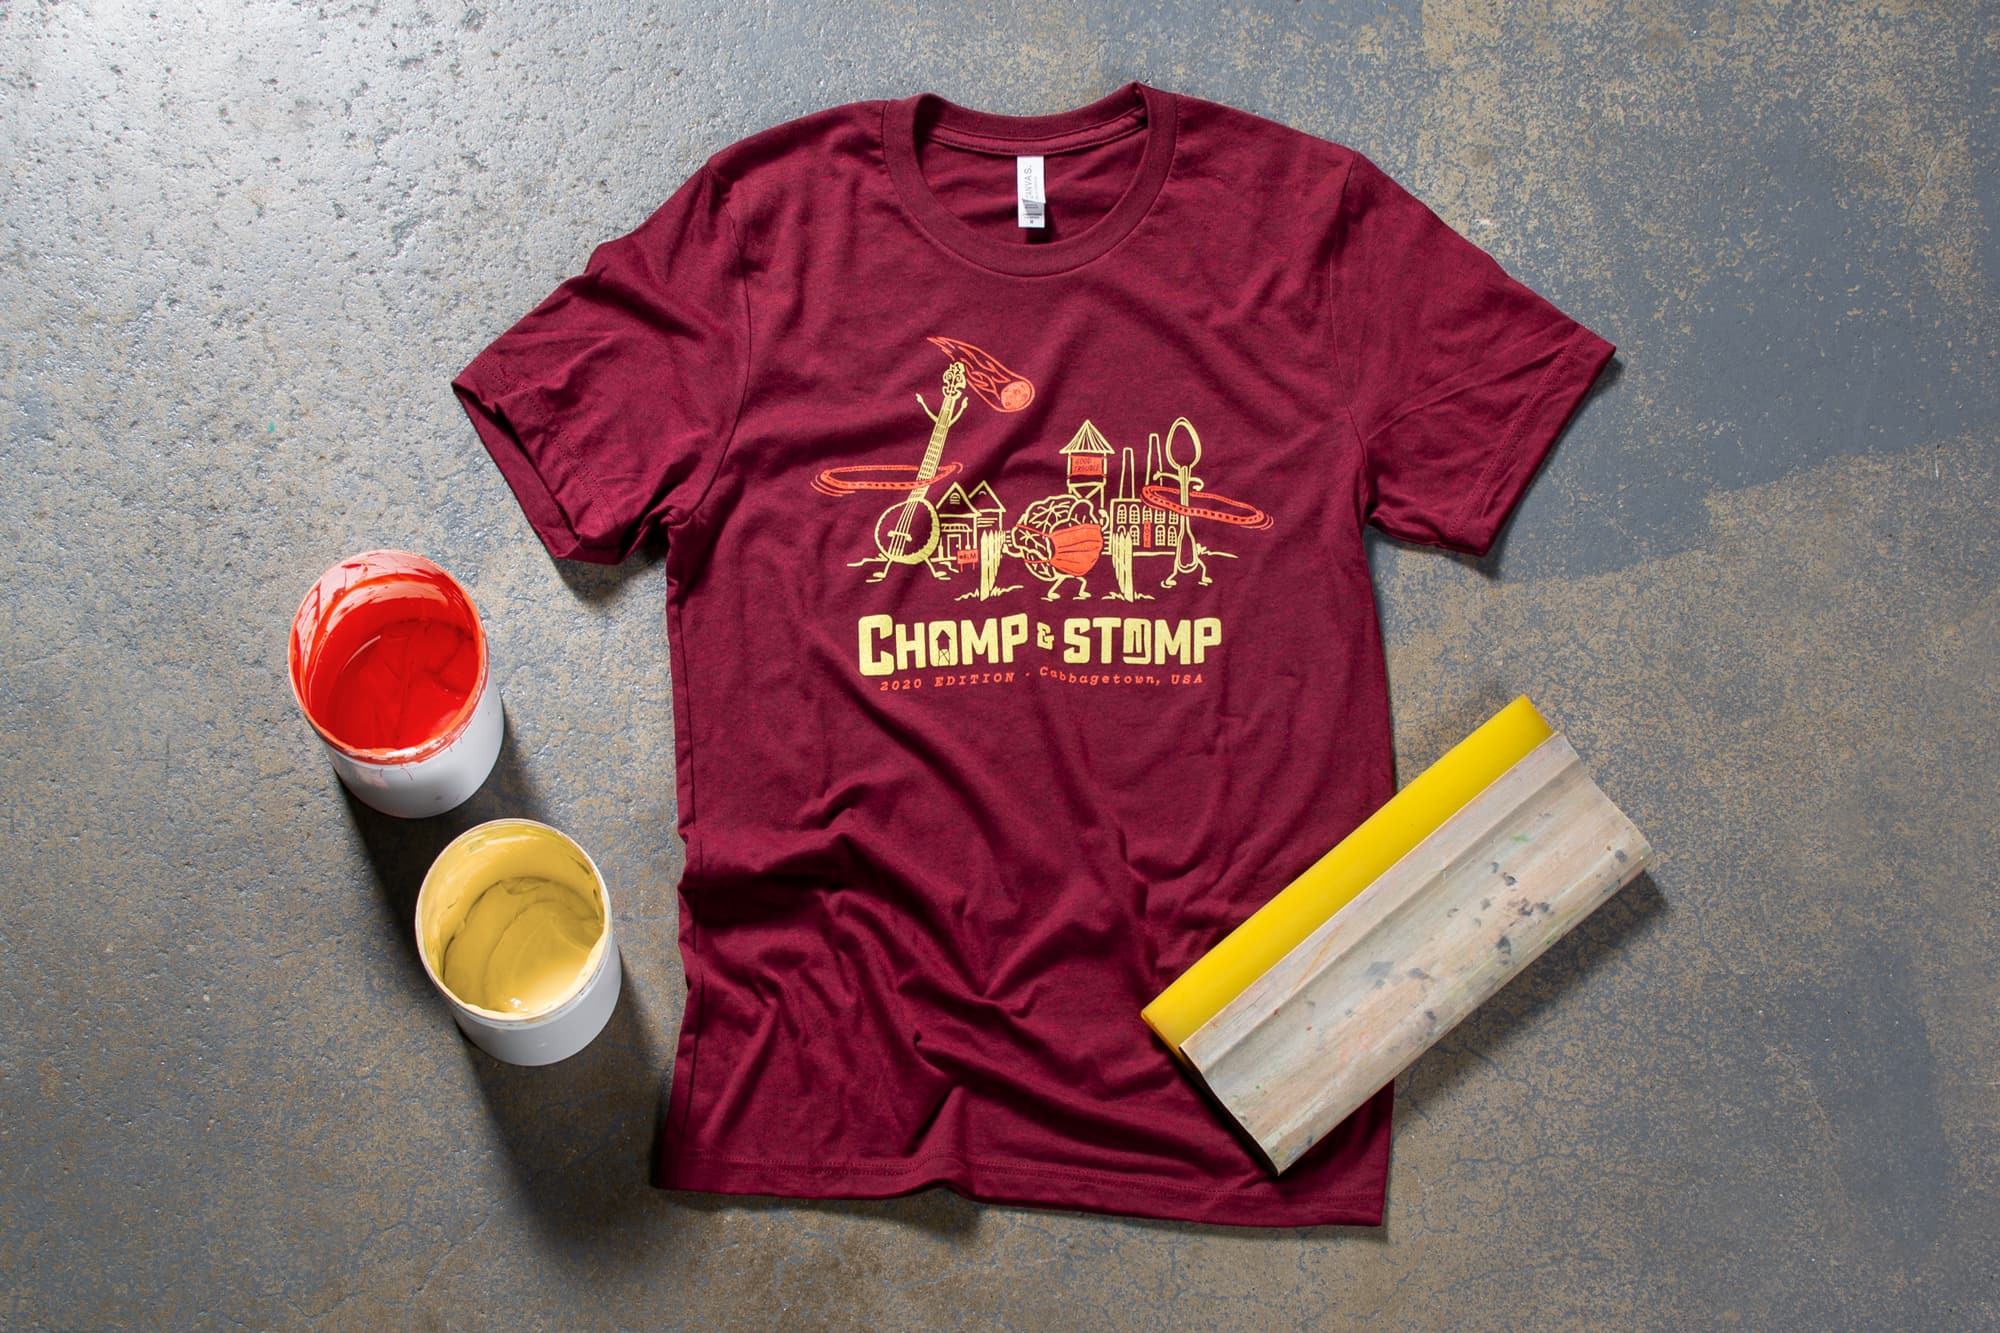 Chomp & Stomp: Finding Support Through Community & T-Shirts